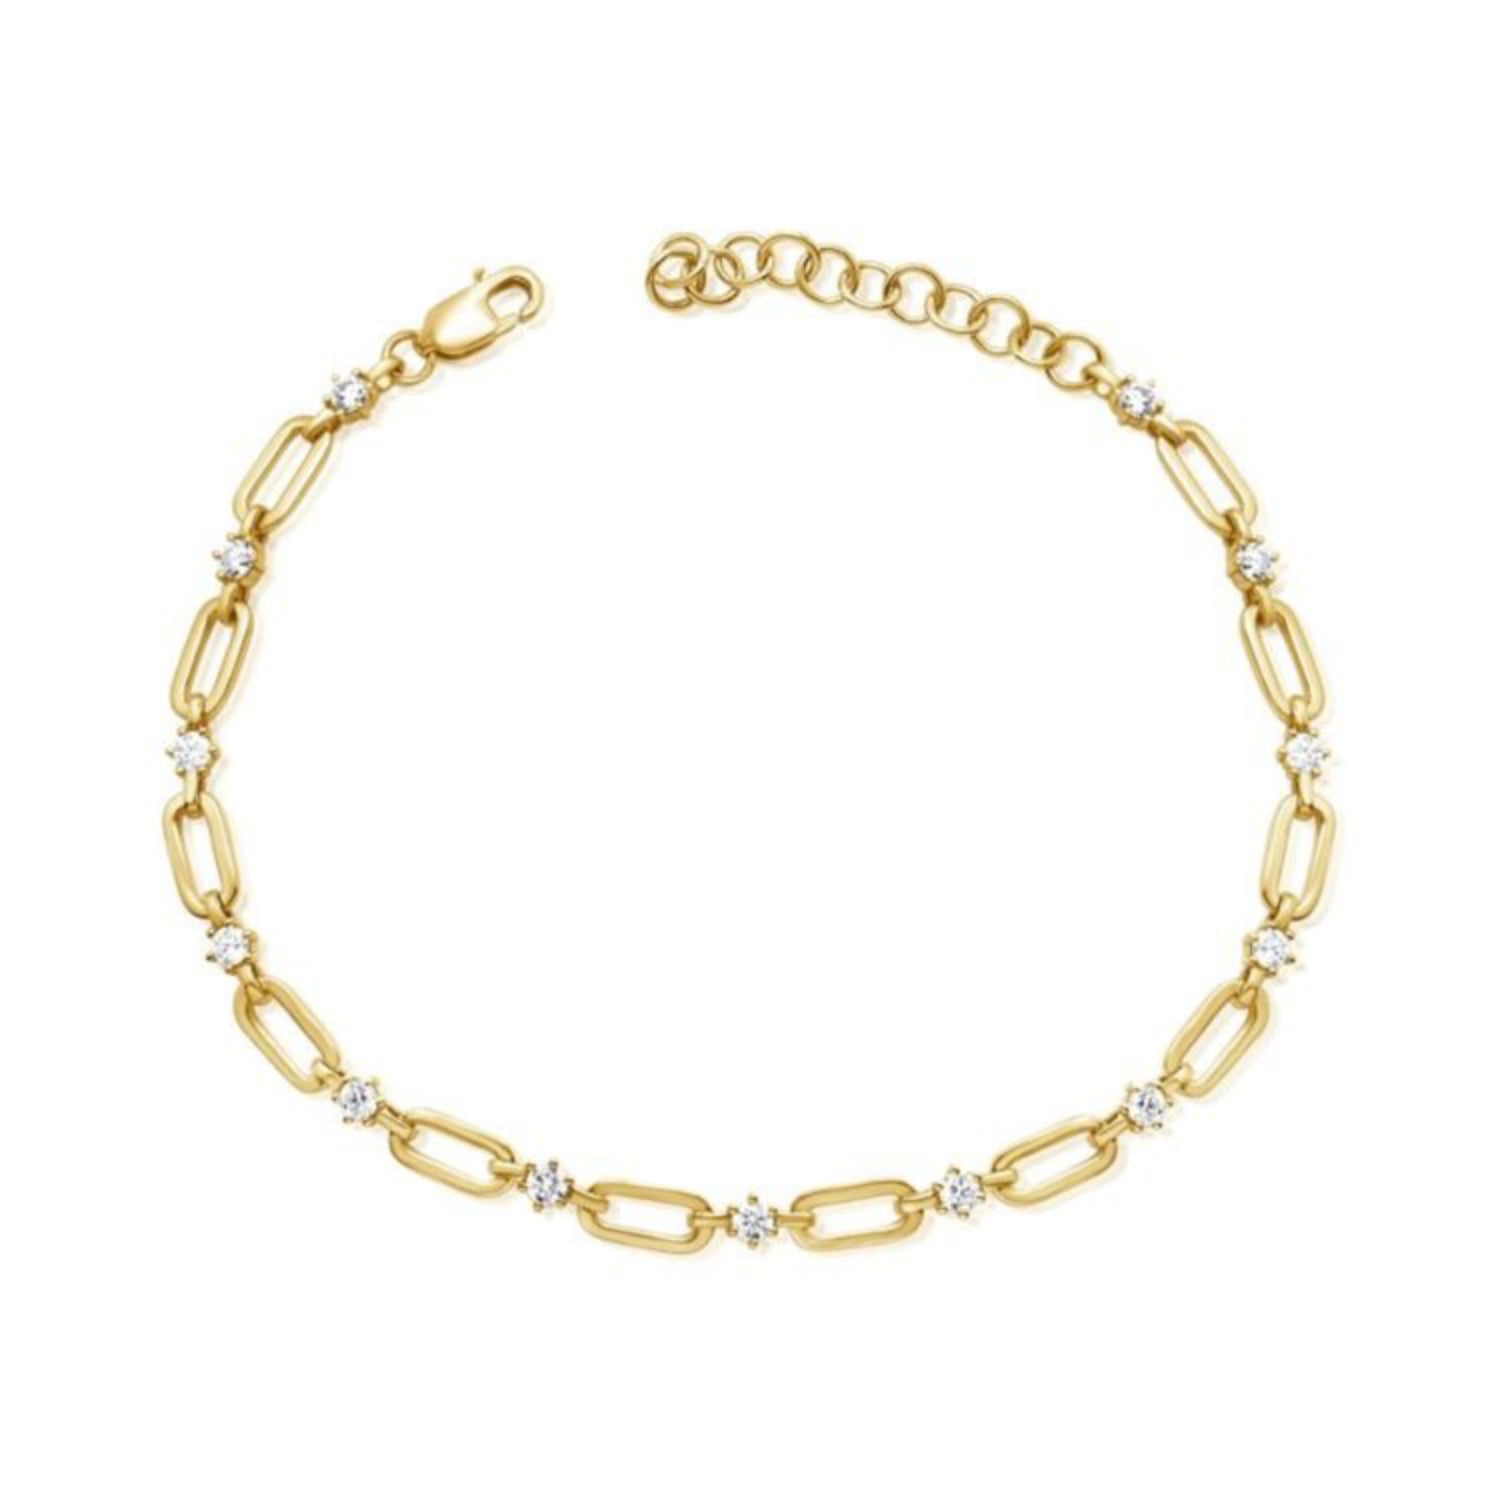 Round Brilliant Cut Diamond Paperclip Link Bracelet in Yellow Gold